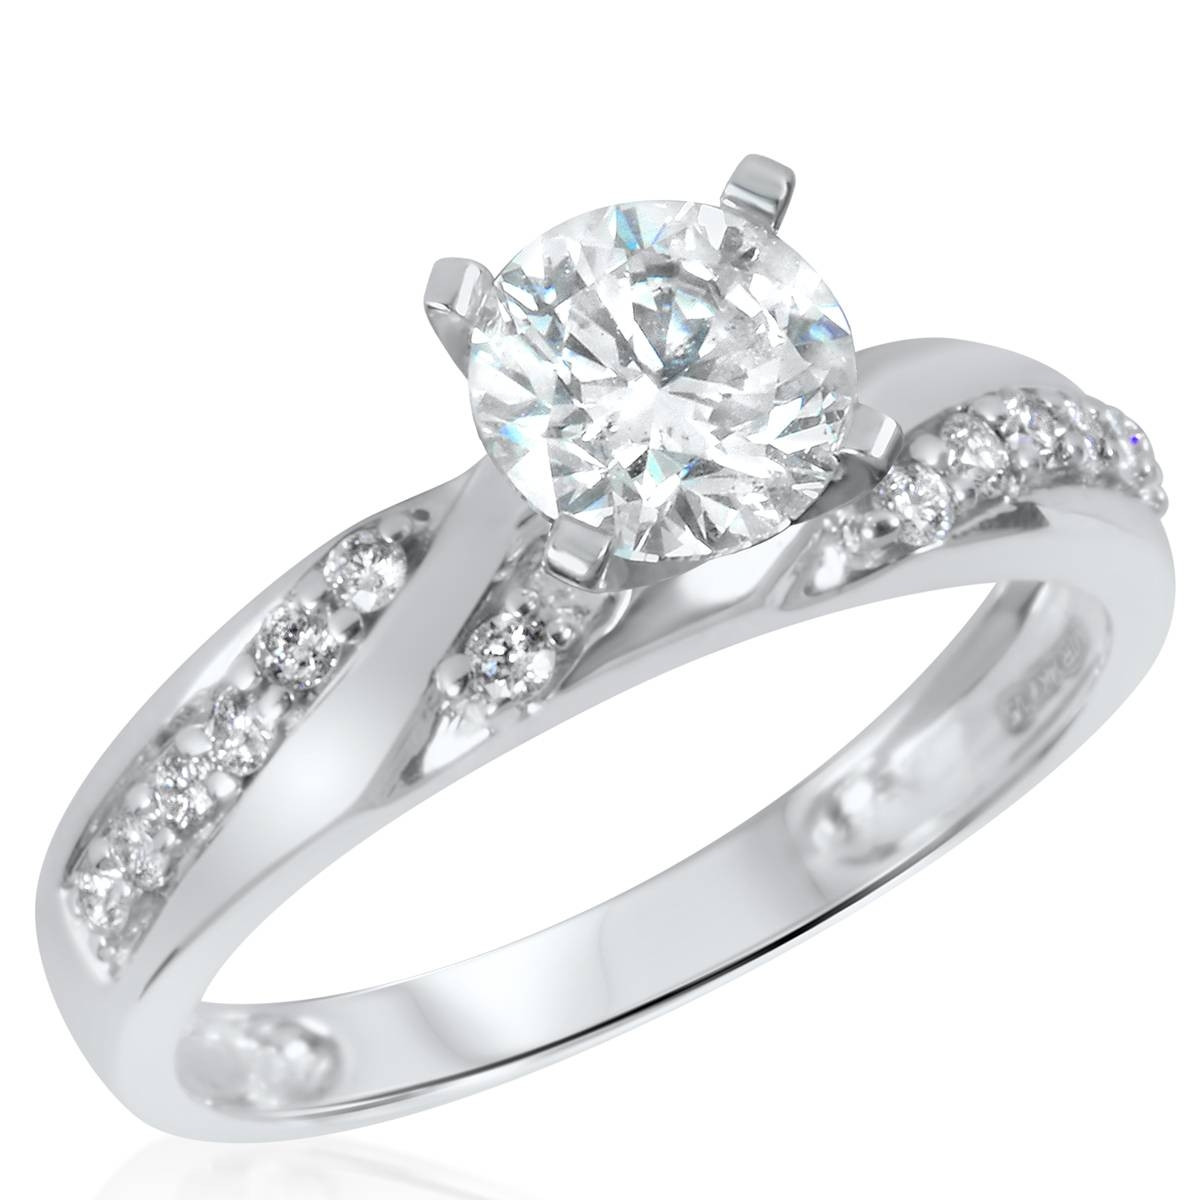 Wedding Rings Cheap
 15 Best Collection of Cheap Wedding Bands For Her